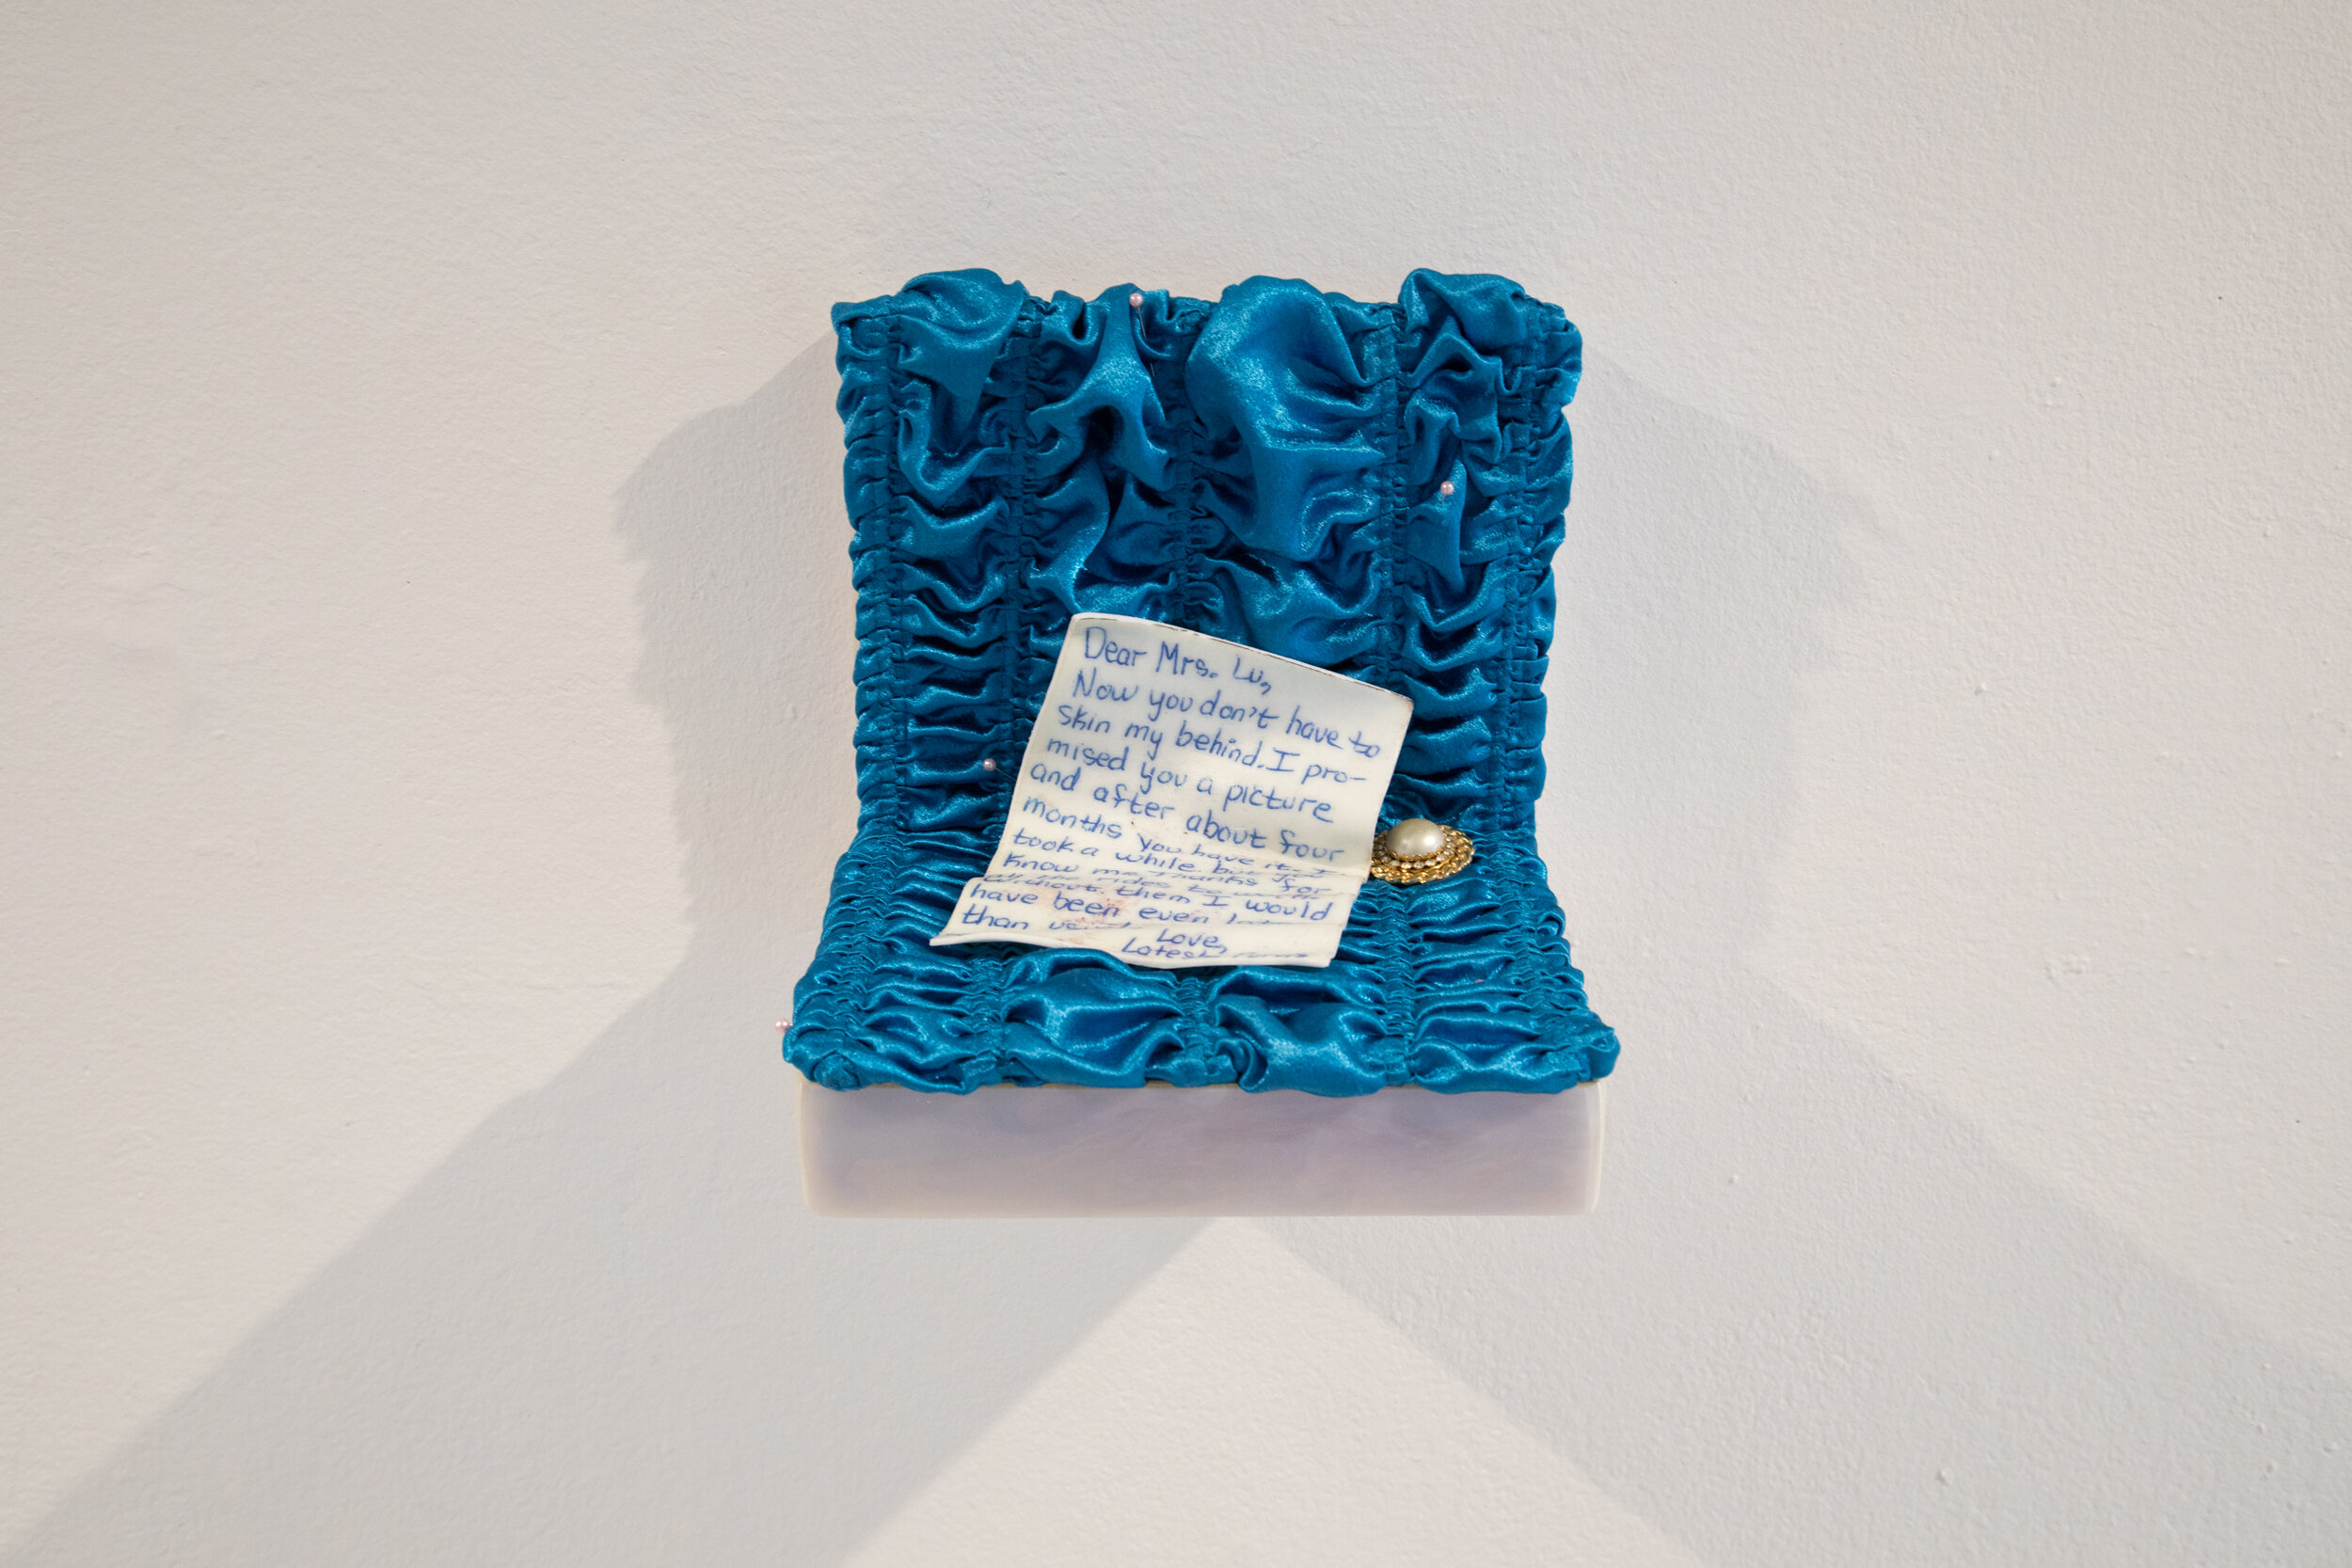  Karinne Smith  Pinkie , 2020 (letter detail) Blue Satin, Vanilla Fondant, Earring, Pink Sewing Pins, Pearlescent Acrylic, Wood 8 x 7 x 7 inches (20 x 18 x 18 cm) 